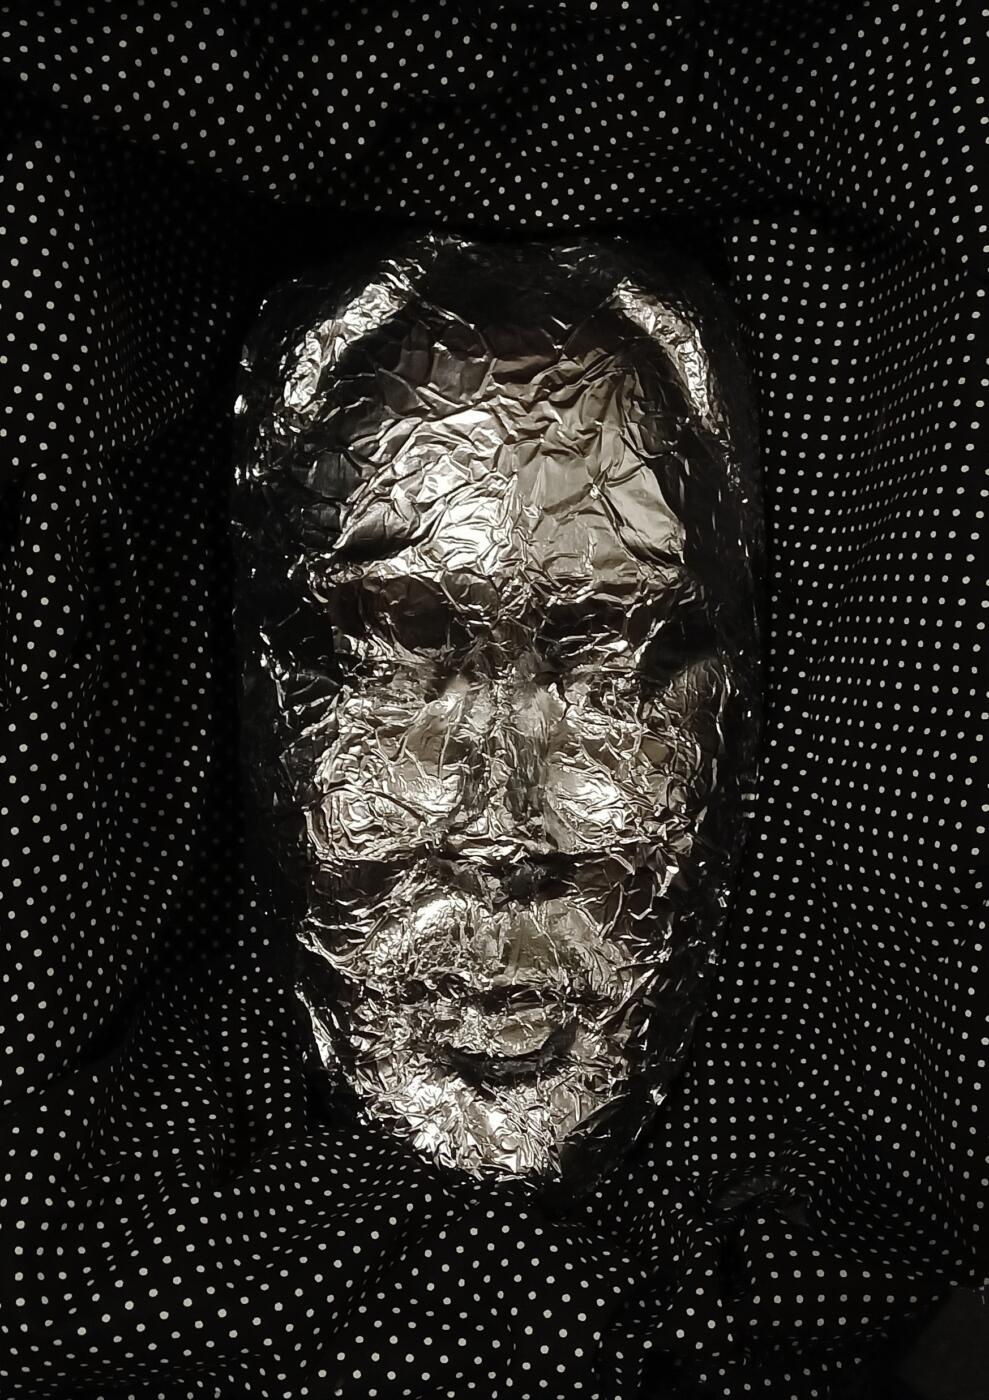 In the center of the image is a mask made of shiny, tin foil like material. Surrounding the mask is a black background with white polka dots.